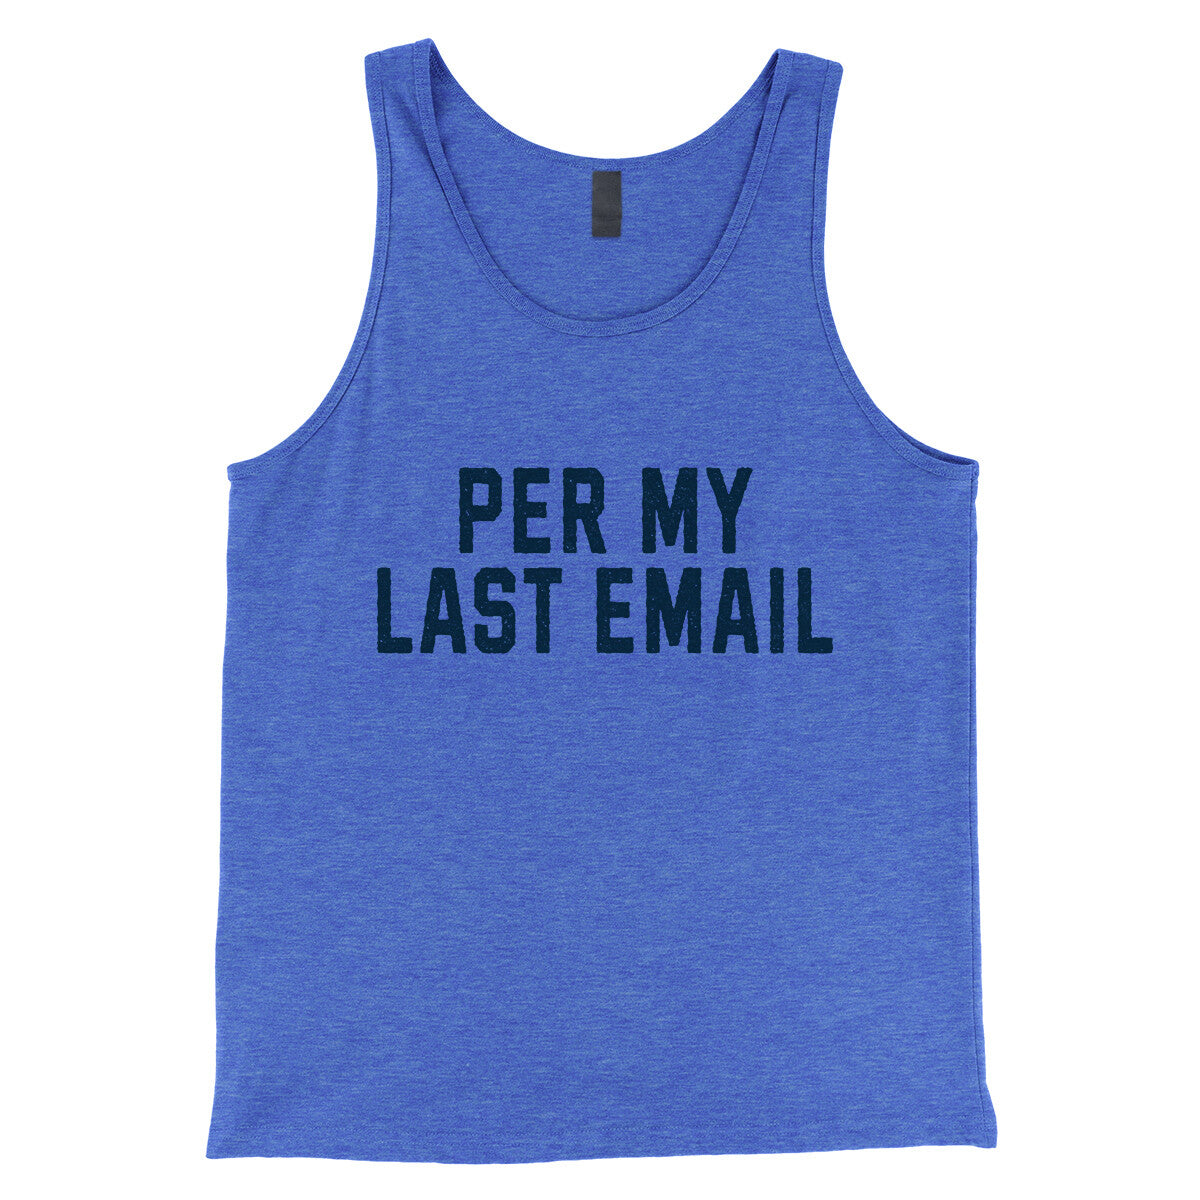 Per My Last Email in True Royal TriBlend Color